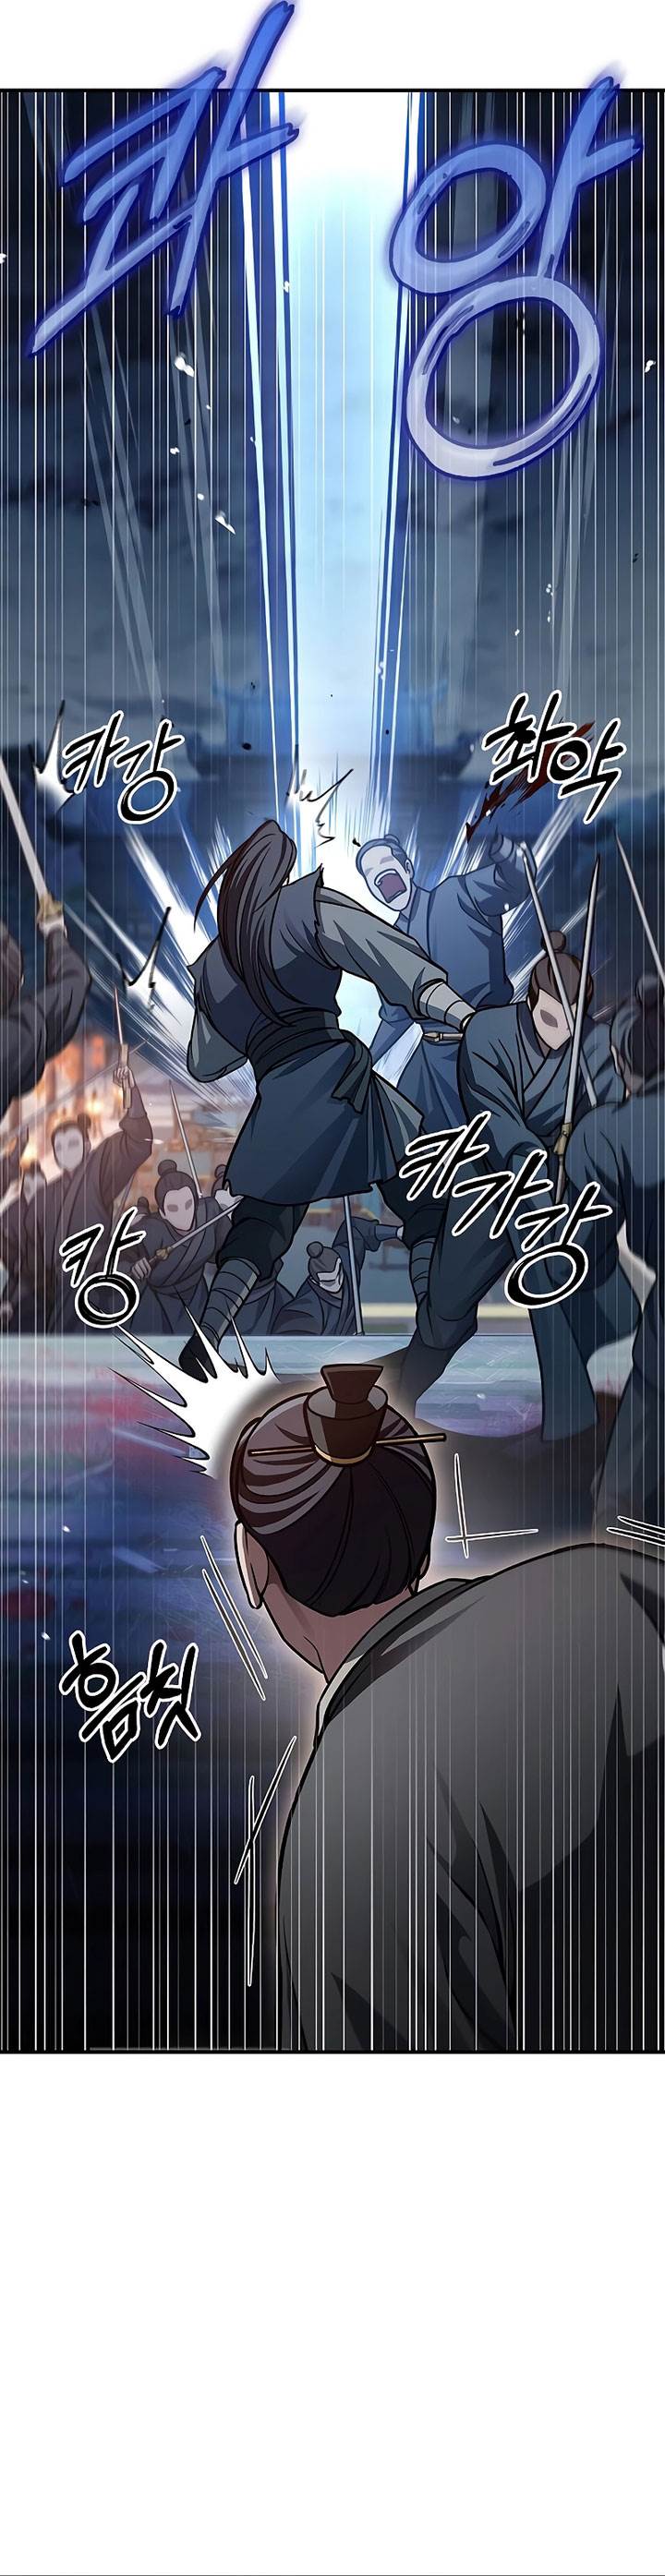 Heavenly Grand Archive’s Young Master Chapter 61